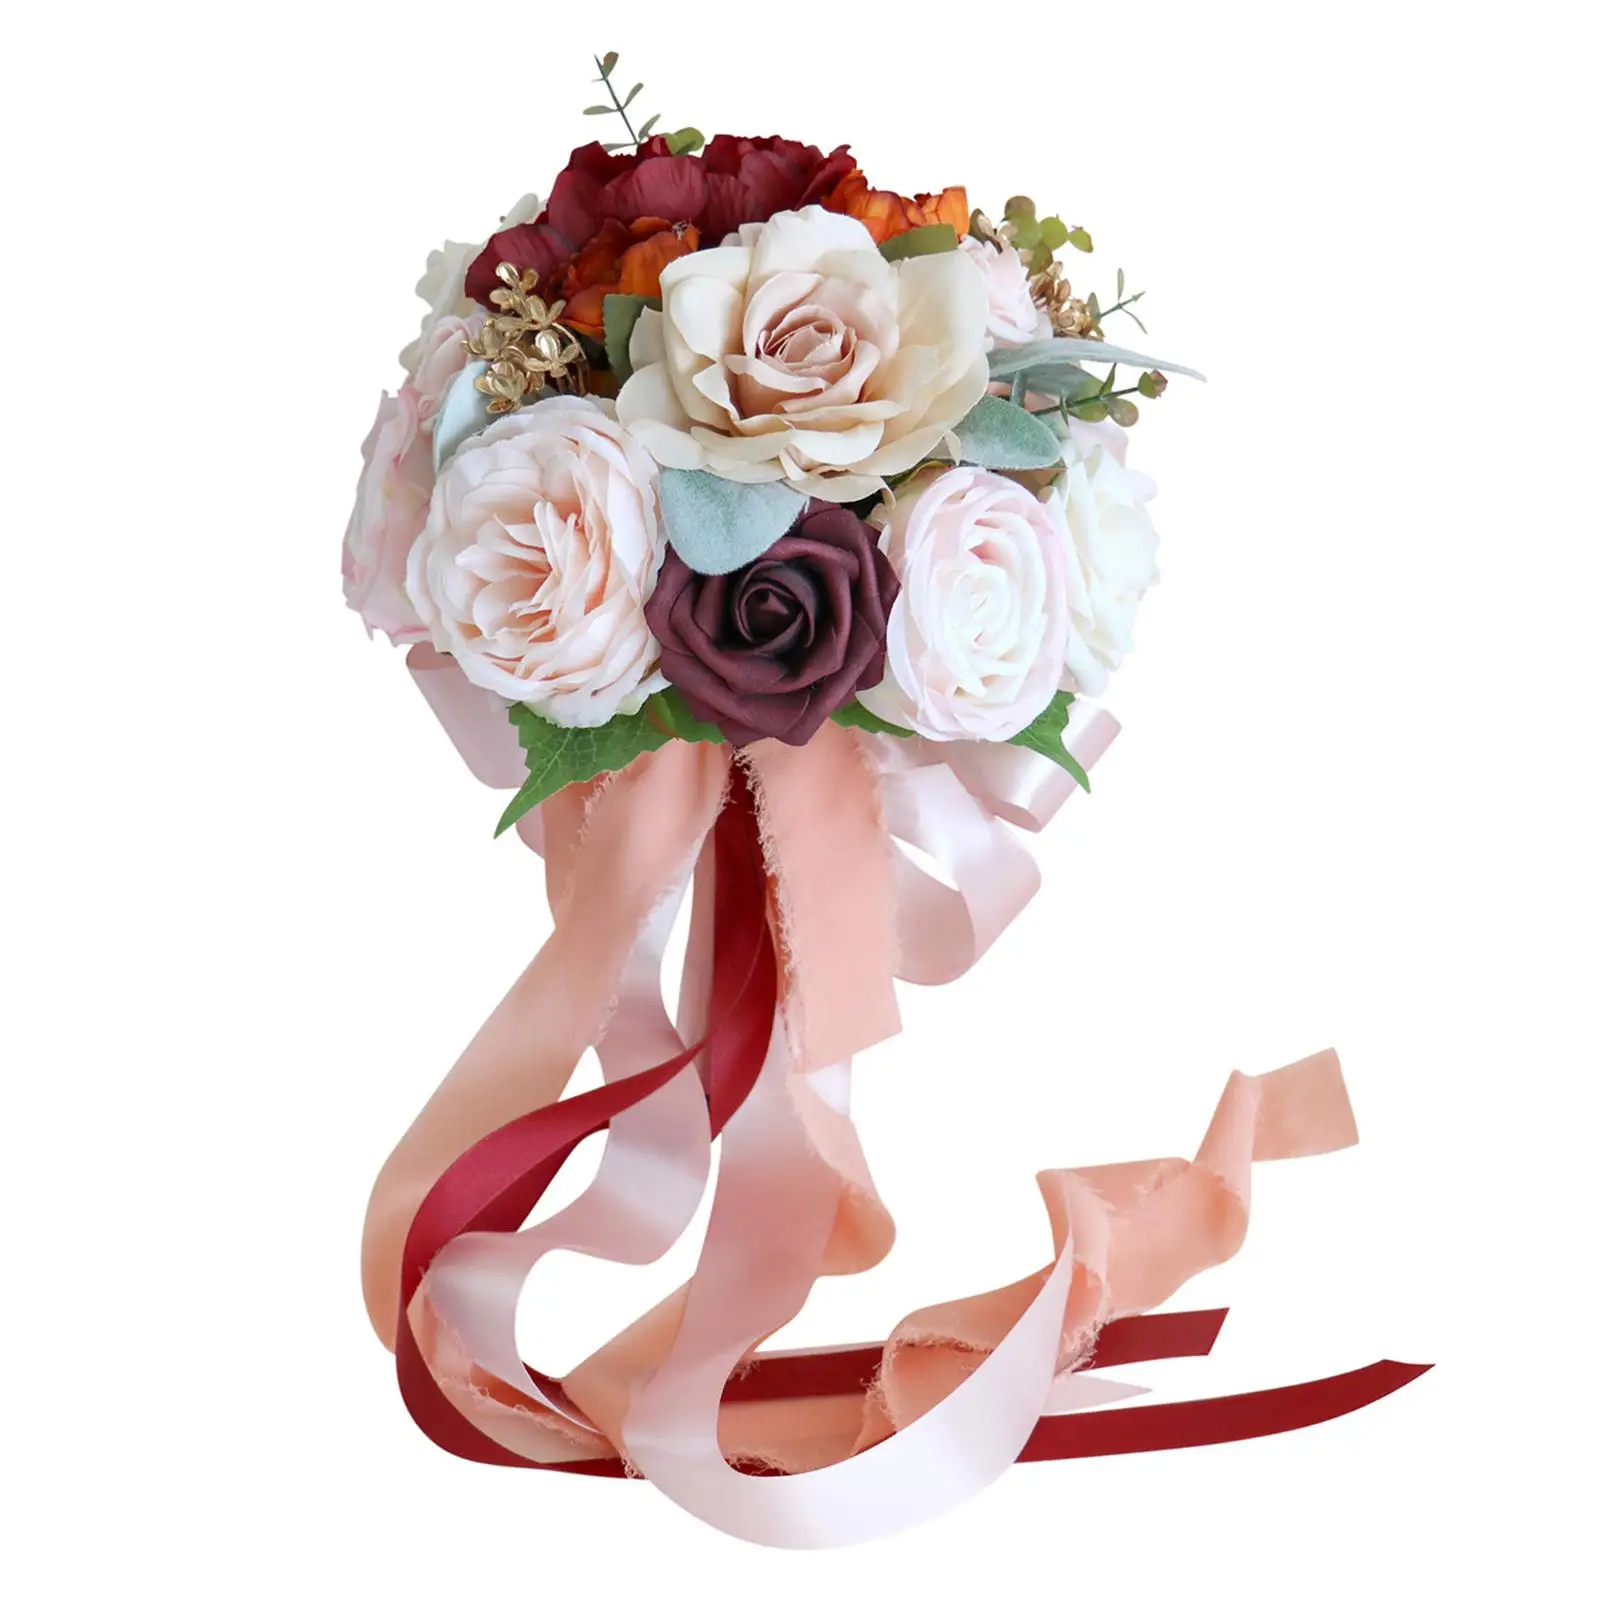 Wedding Bouquet Artificial Bridal Flowers for Graduation Ceremony Photo Proposal Girl